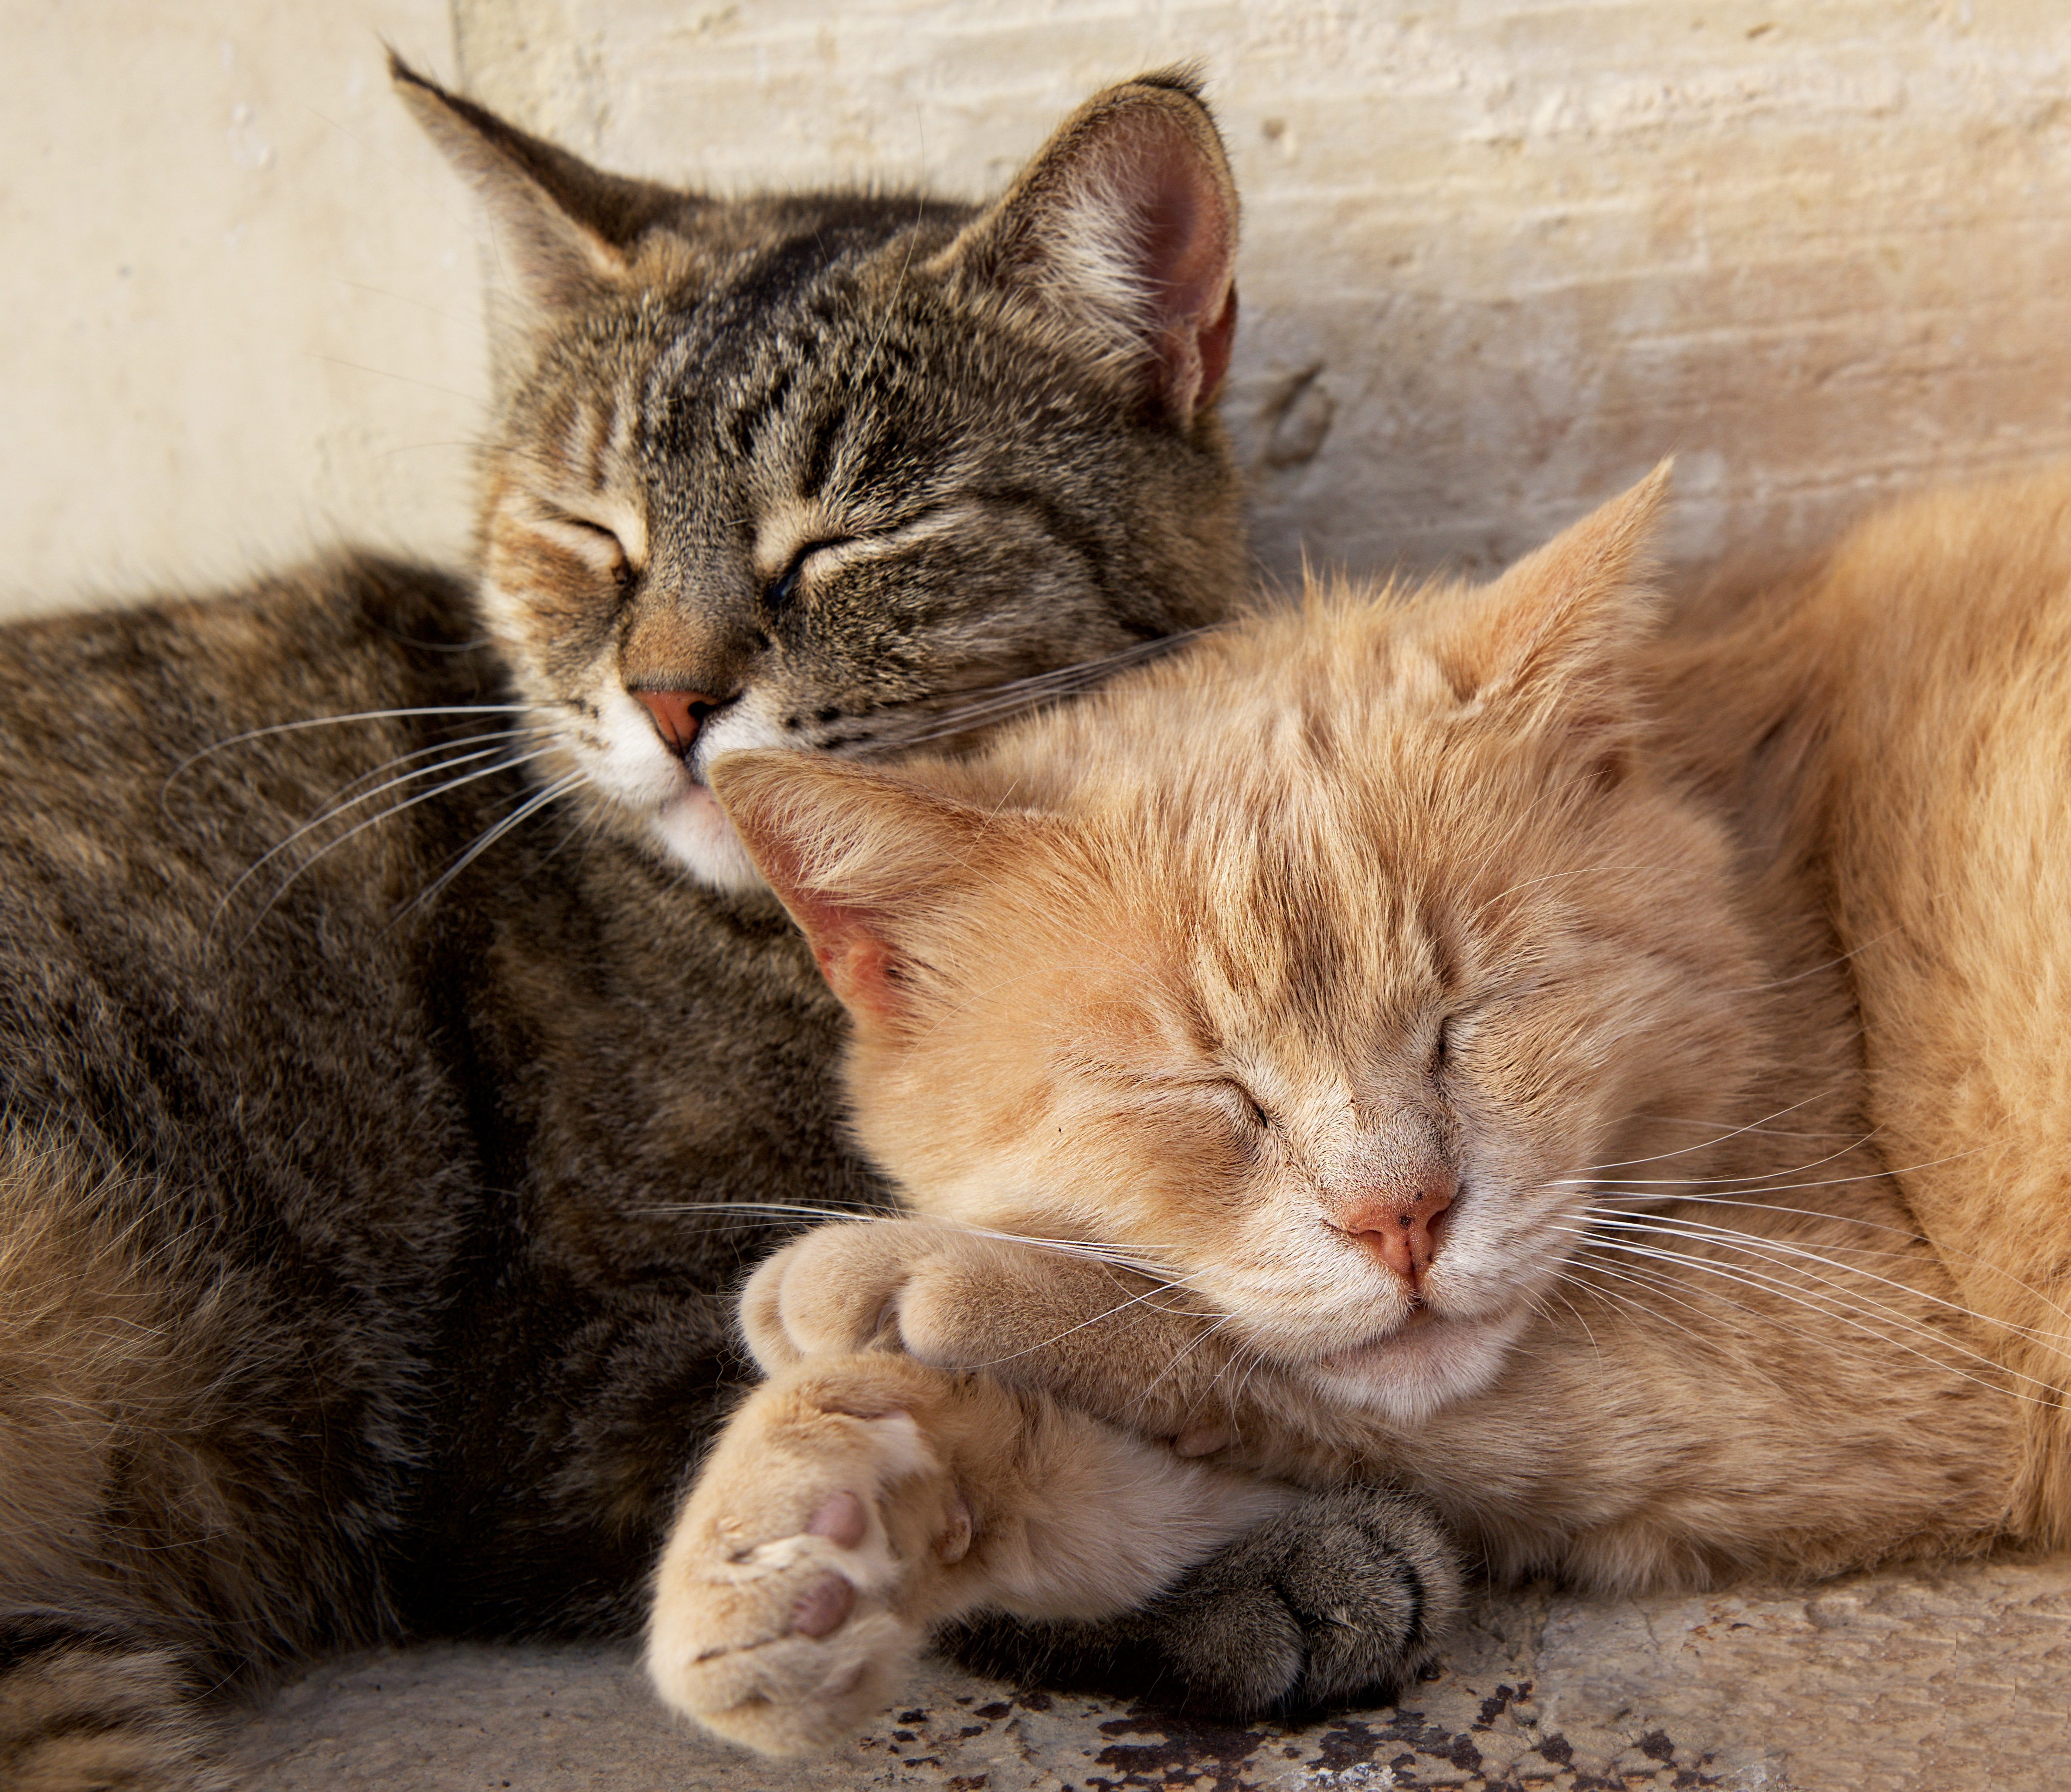 bigstock-Portrait-Of-Two-Cats-Brown-An-239843755